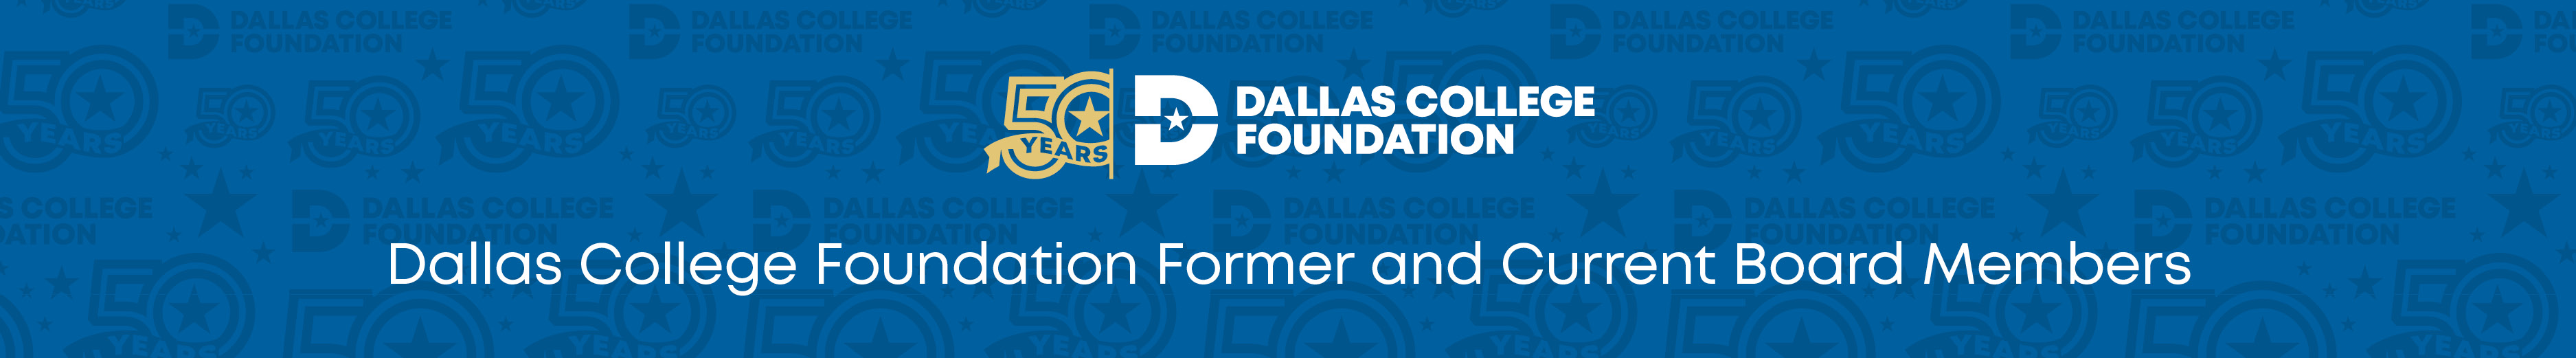 Dallas College Foundation Former and Current Board Members